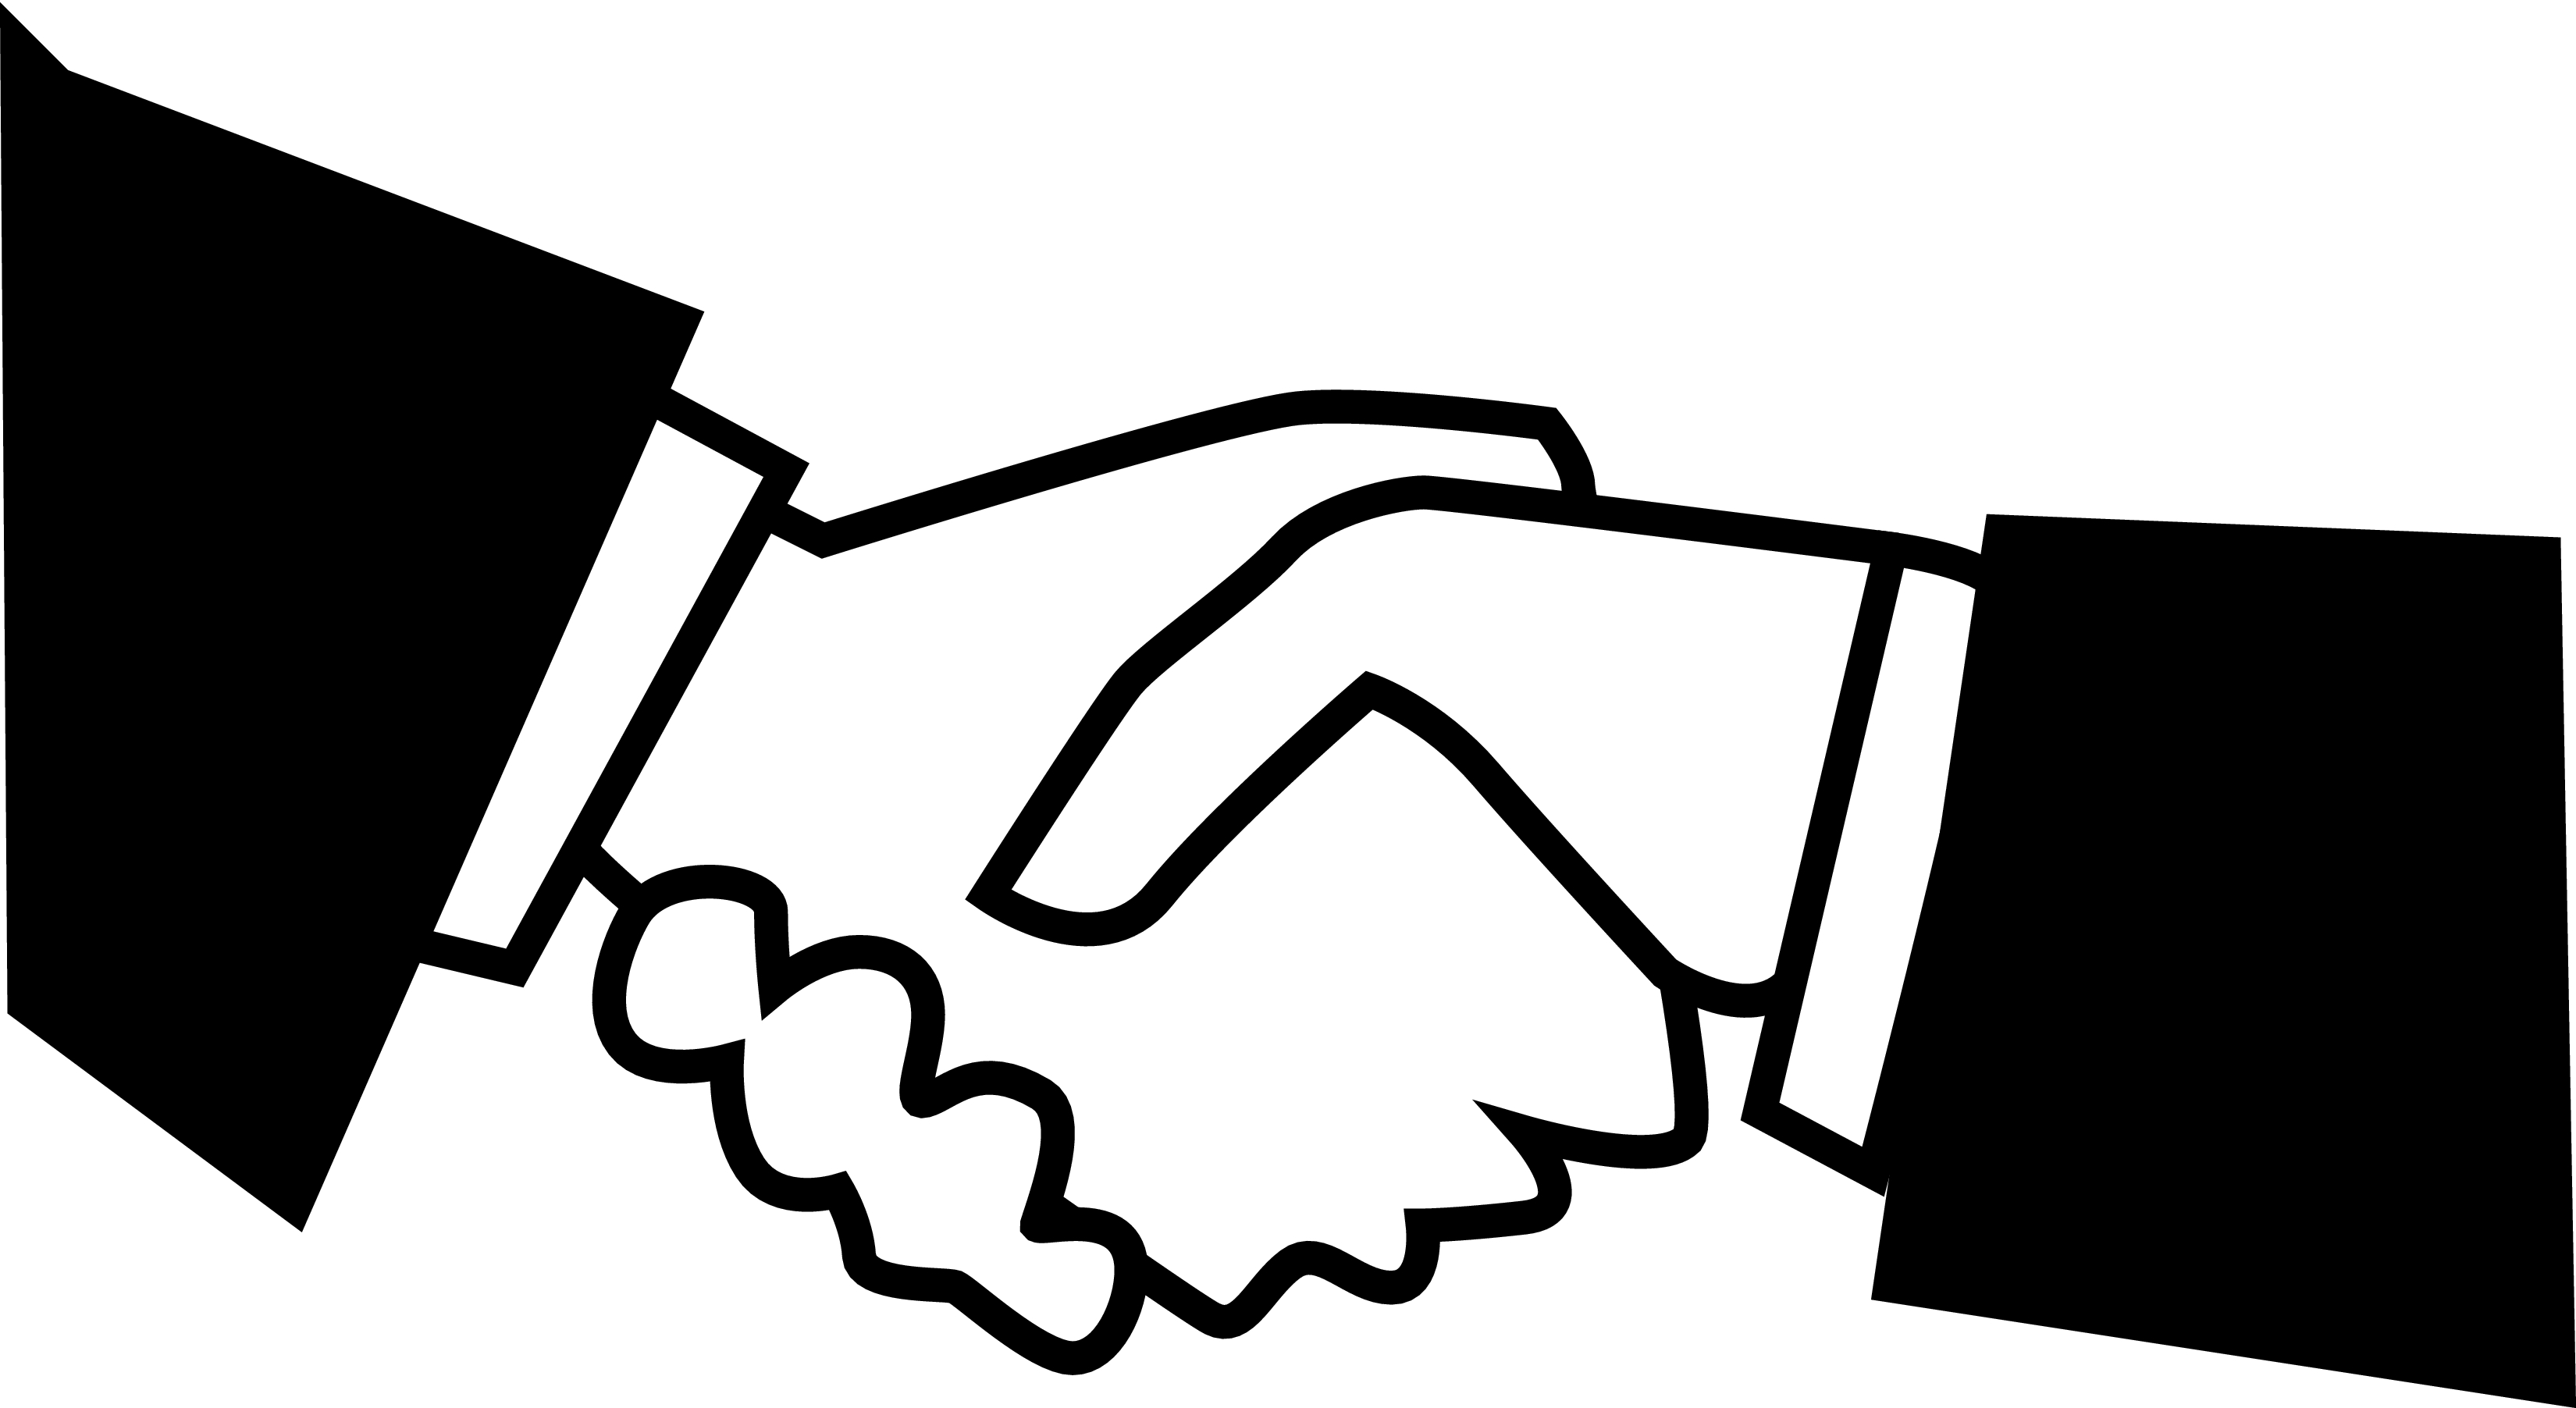 Holding Hands Clipart Black And White | Clipart Panda - Free ...